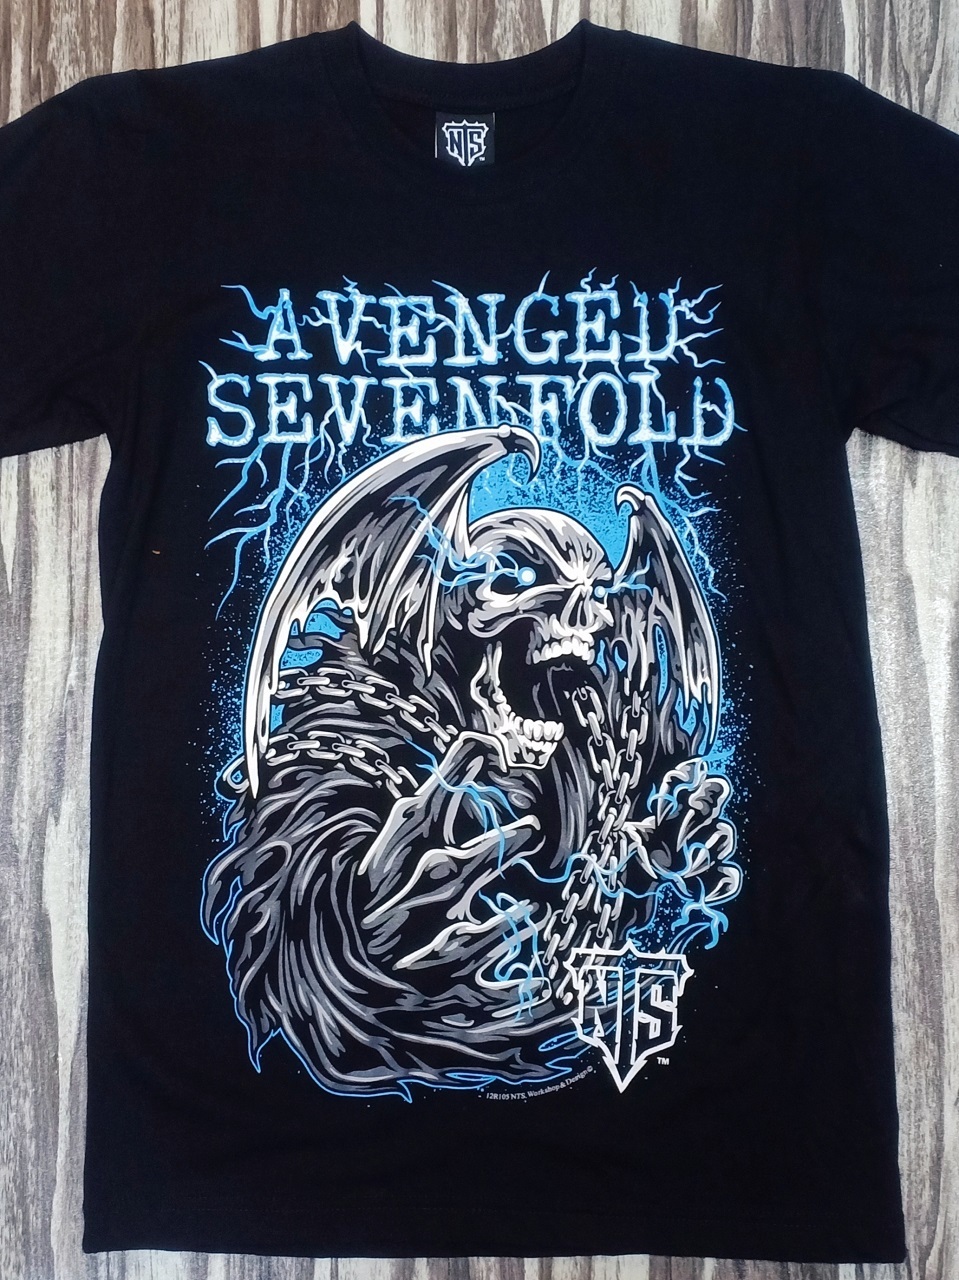 HIGH BLACK T-SHIRT TYPE TYPE NEW – SEVENFOLD NEW COLLECTABLE GRADE MOAI AVENGED PREMIUM METAL HEAVY ORIGINAL TIMBER COTTON SILK LIGHTNING SYSTEM NTS SCREEN QUALITY A7X SPEED ROCK SYSTEM 12R105 CHAIN BAND